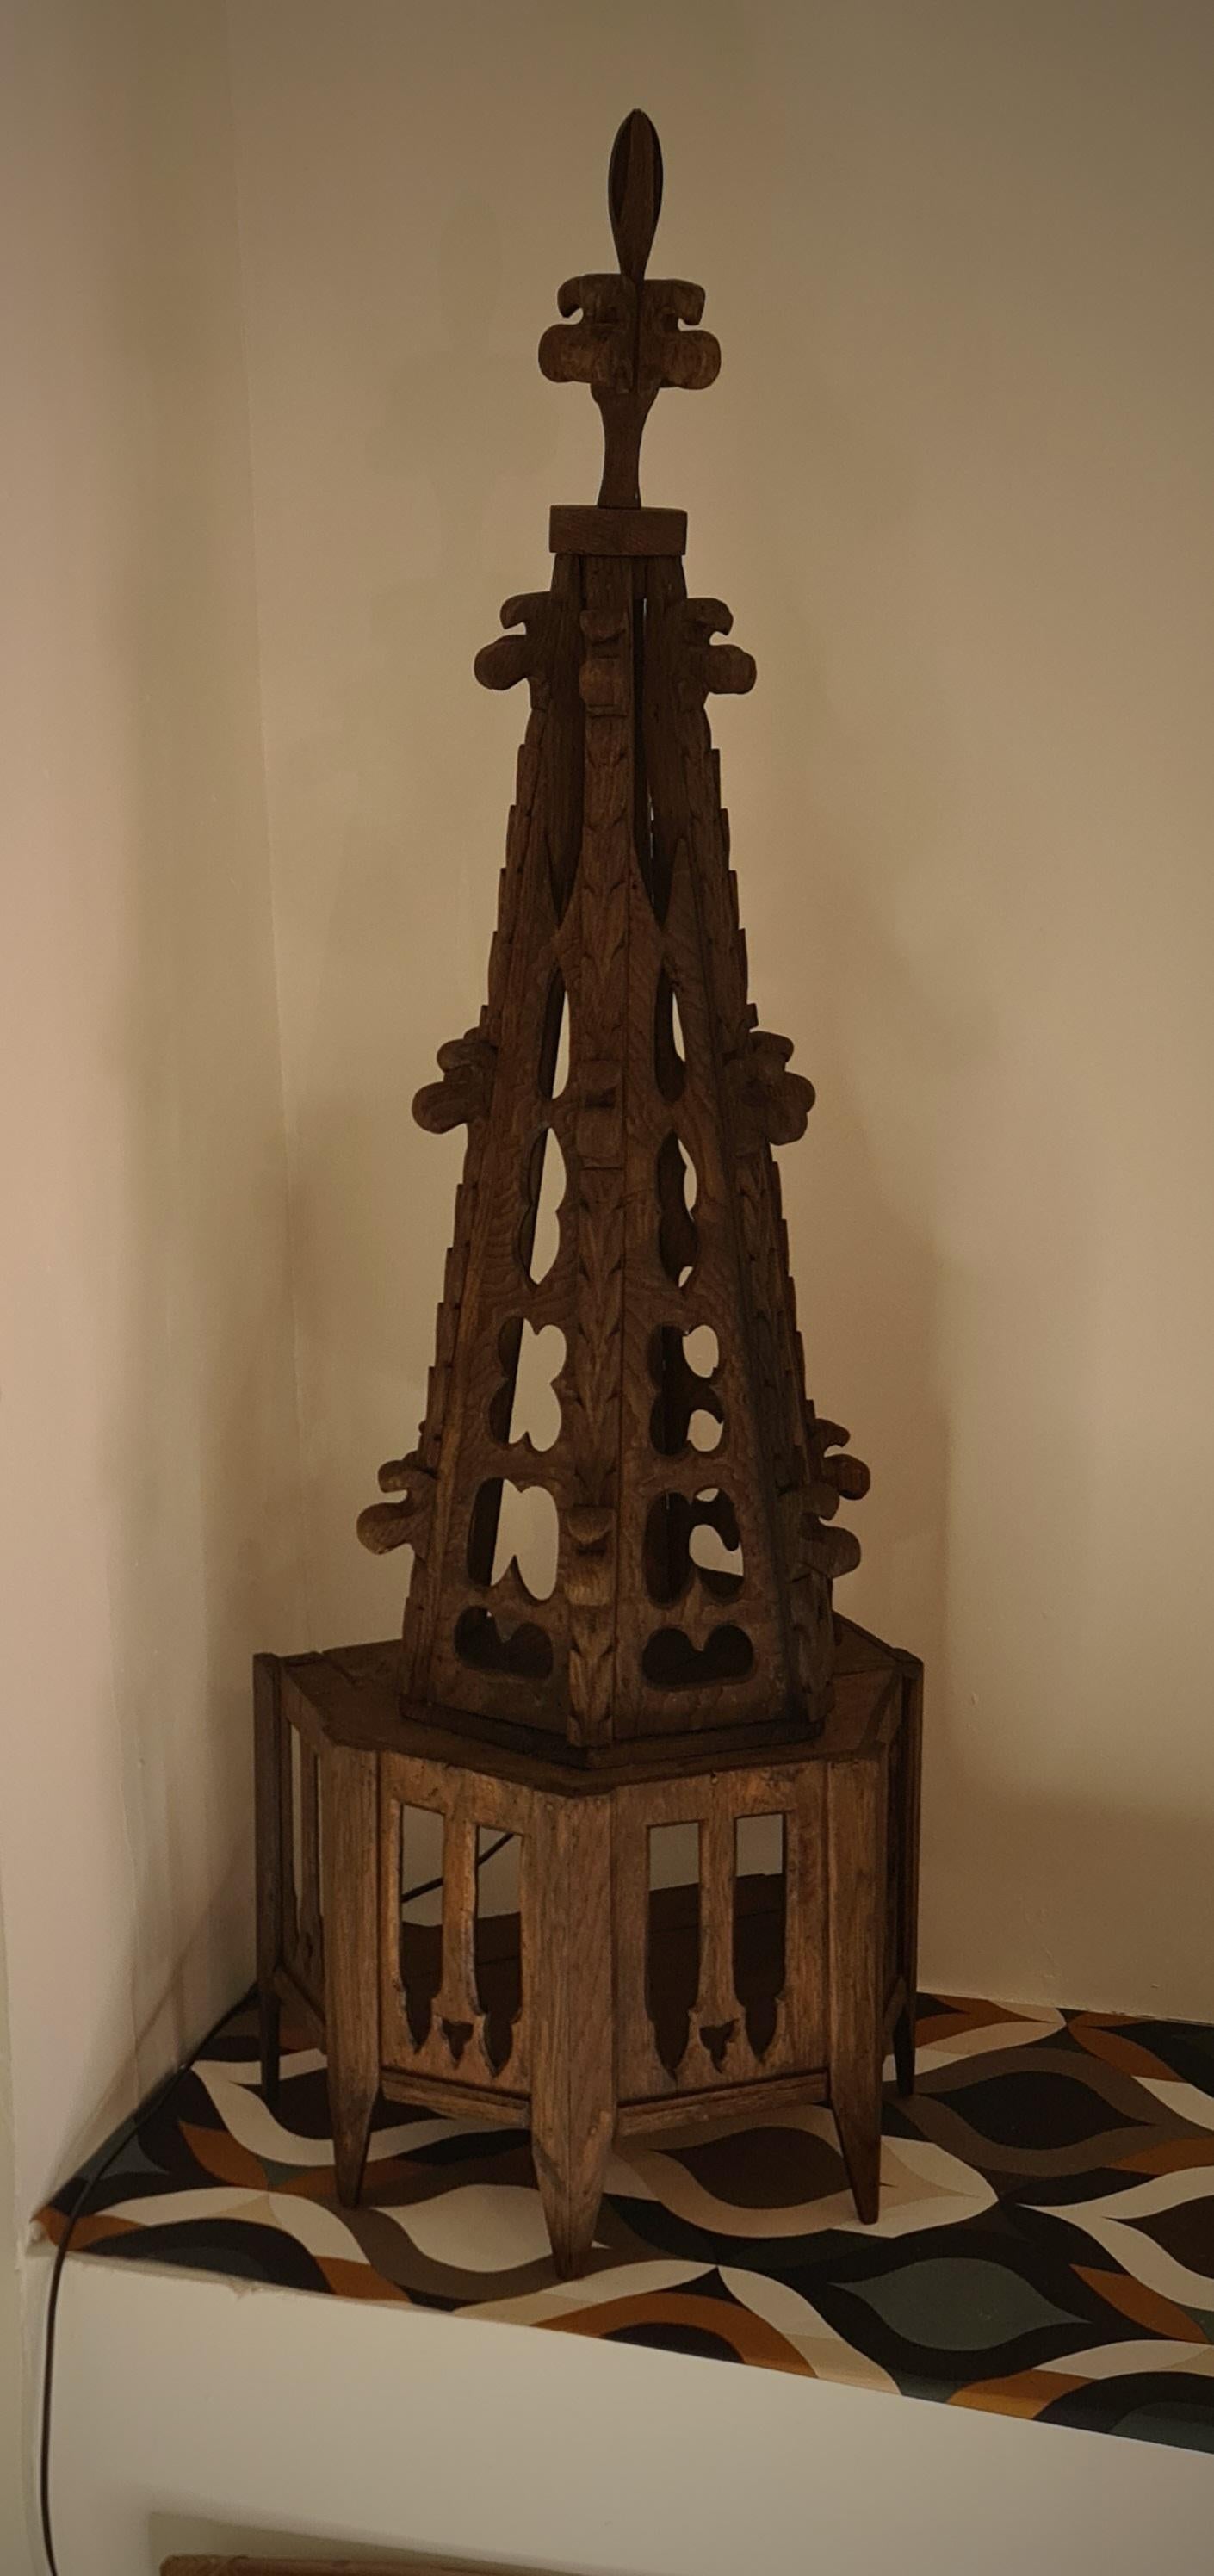 Element of church decoration, Pinnacle transformed into a lamp 2